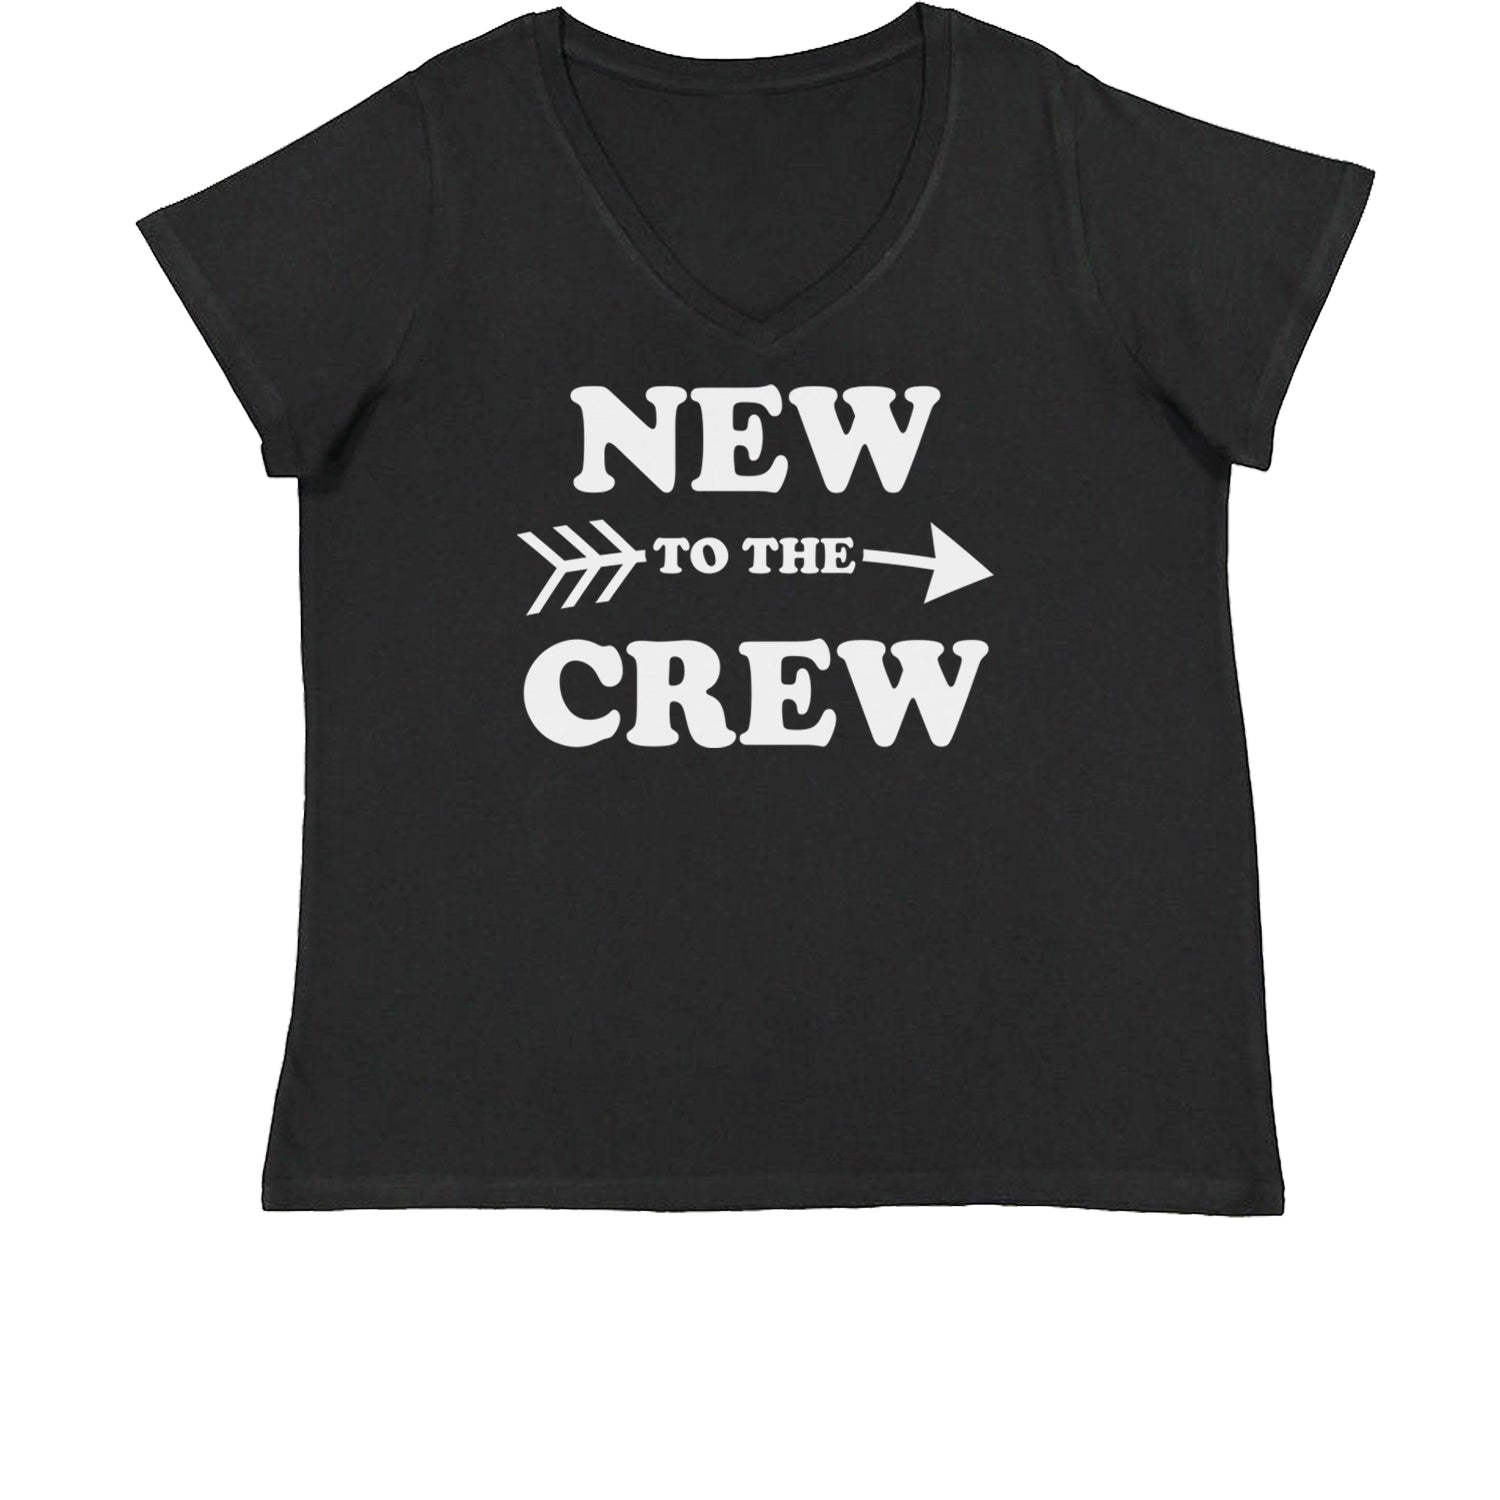 New To The Crew Womens Plus Size V-Neck T-shirt announcement, baby, cousin, gender, newborn, reveal, toddler by Expression Tees